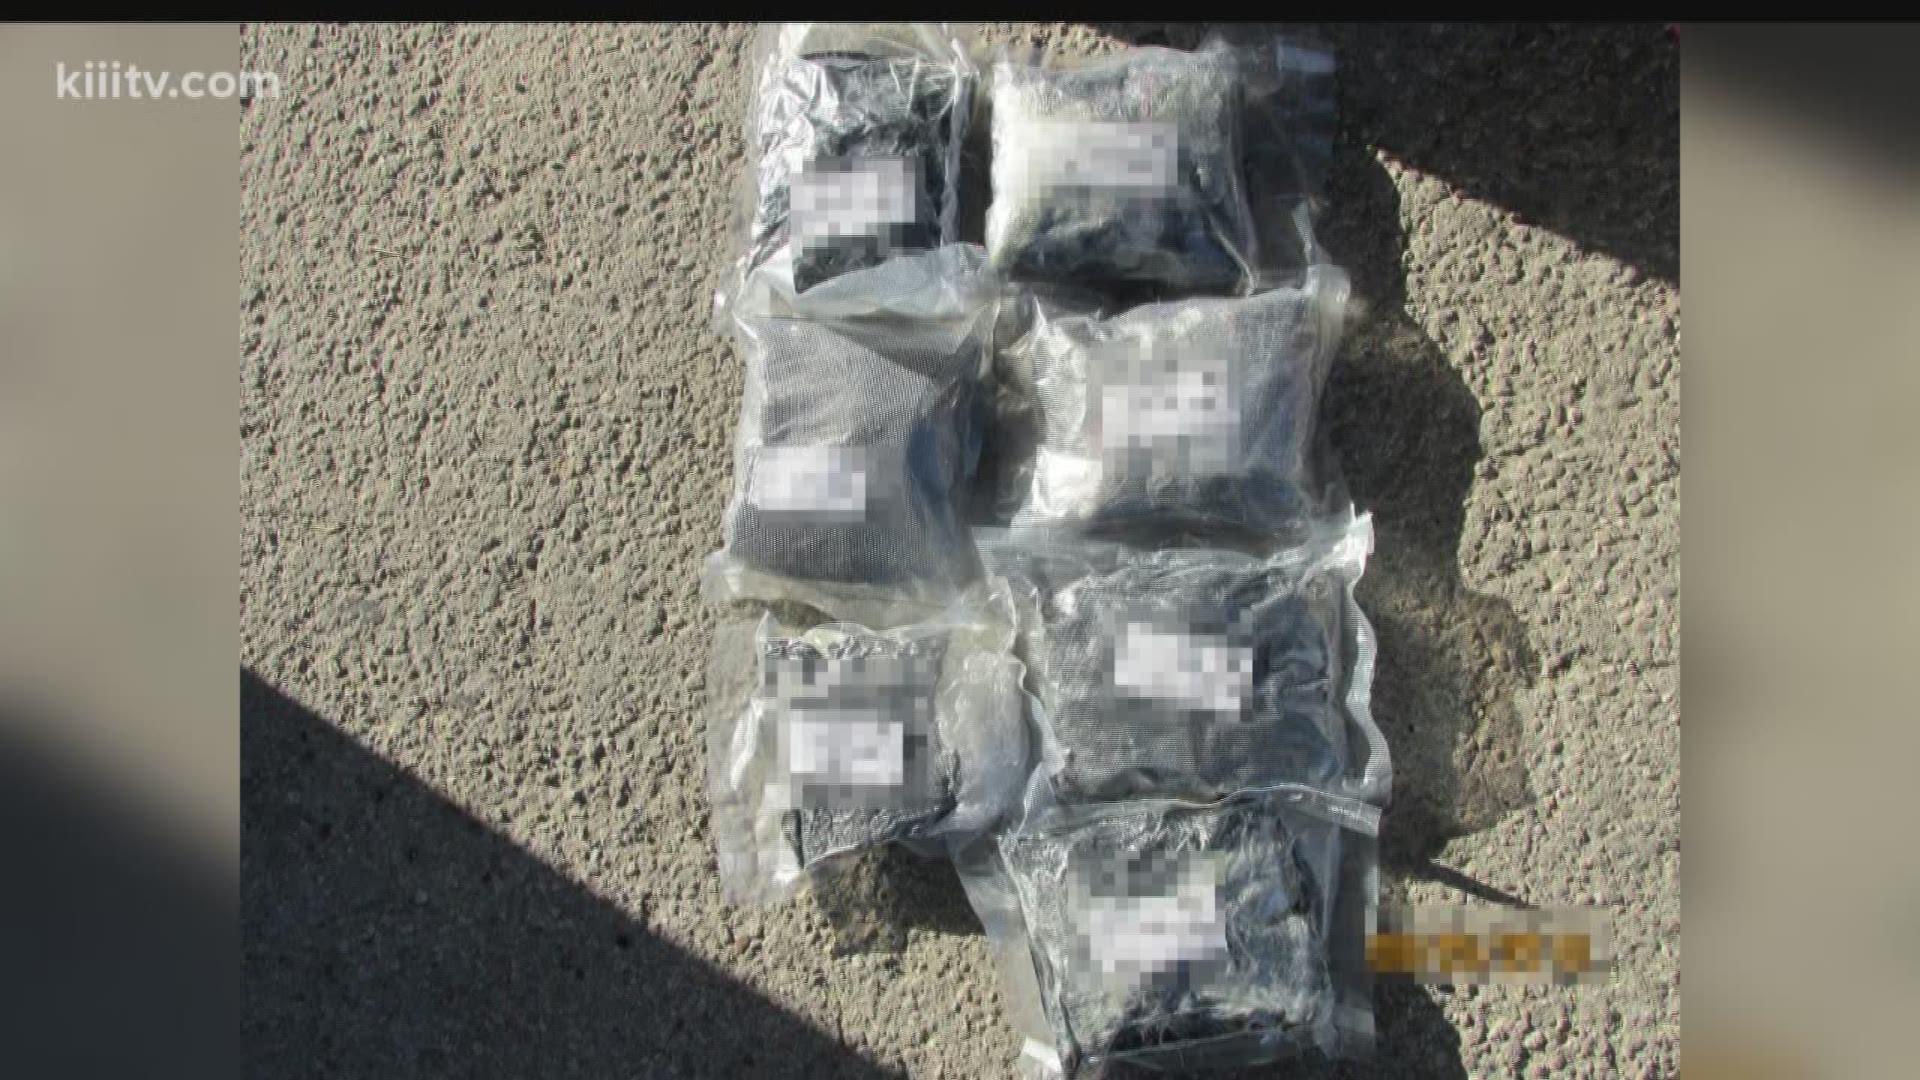 Agents discovered seven bundles of meth in the car. The driver was arrested at the scene.